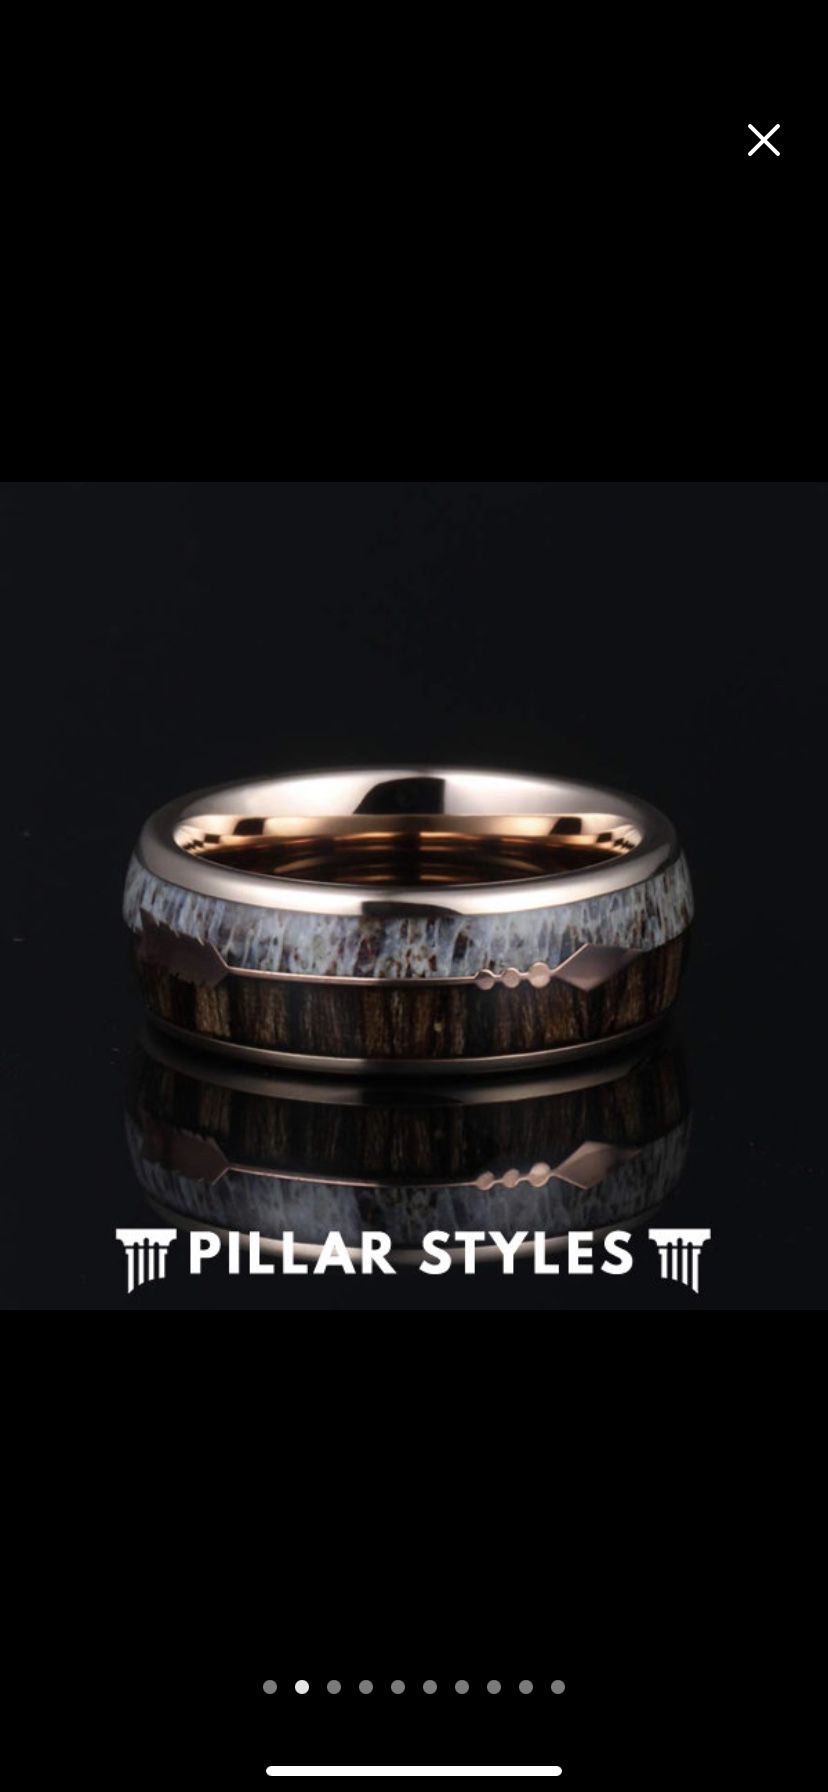 Men’s ring size 8 wood and antler in tungsten carbide